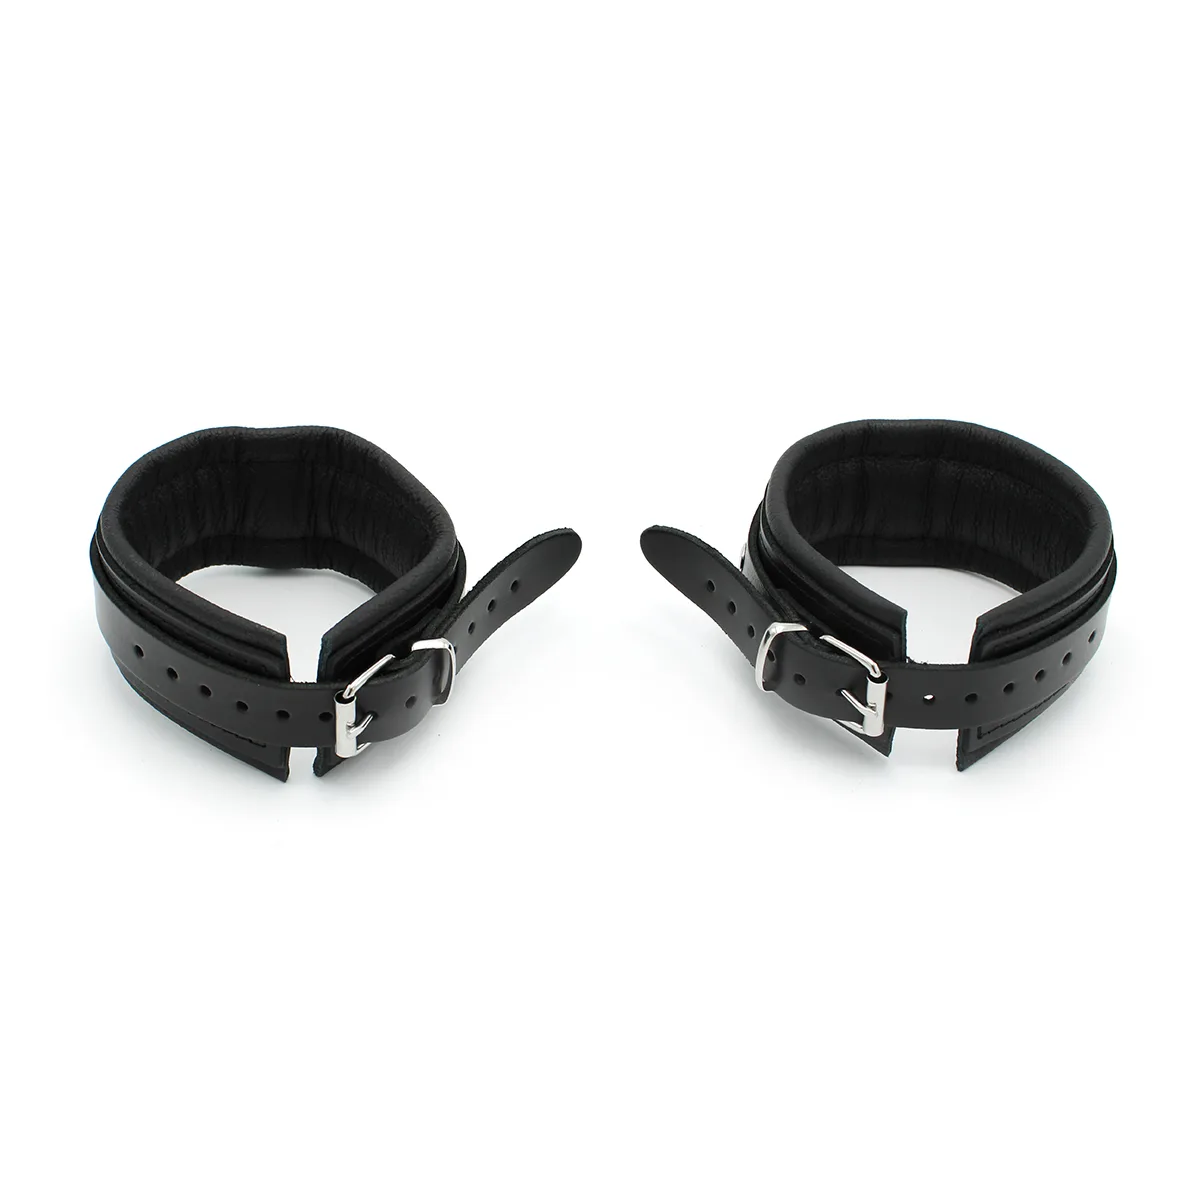 Leather-Ankle-cuffs-with-Metal-Shackle-134-KIO-0372-4